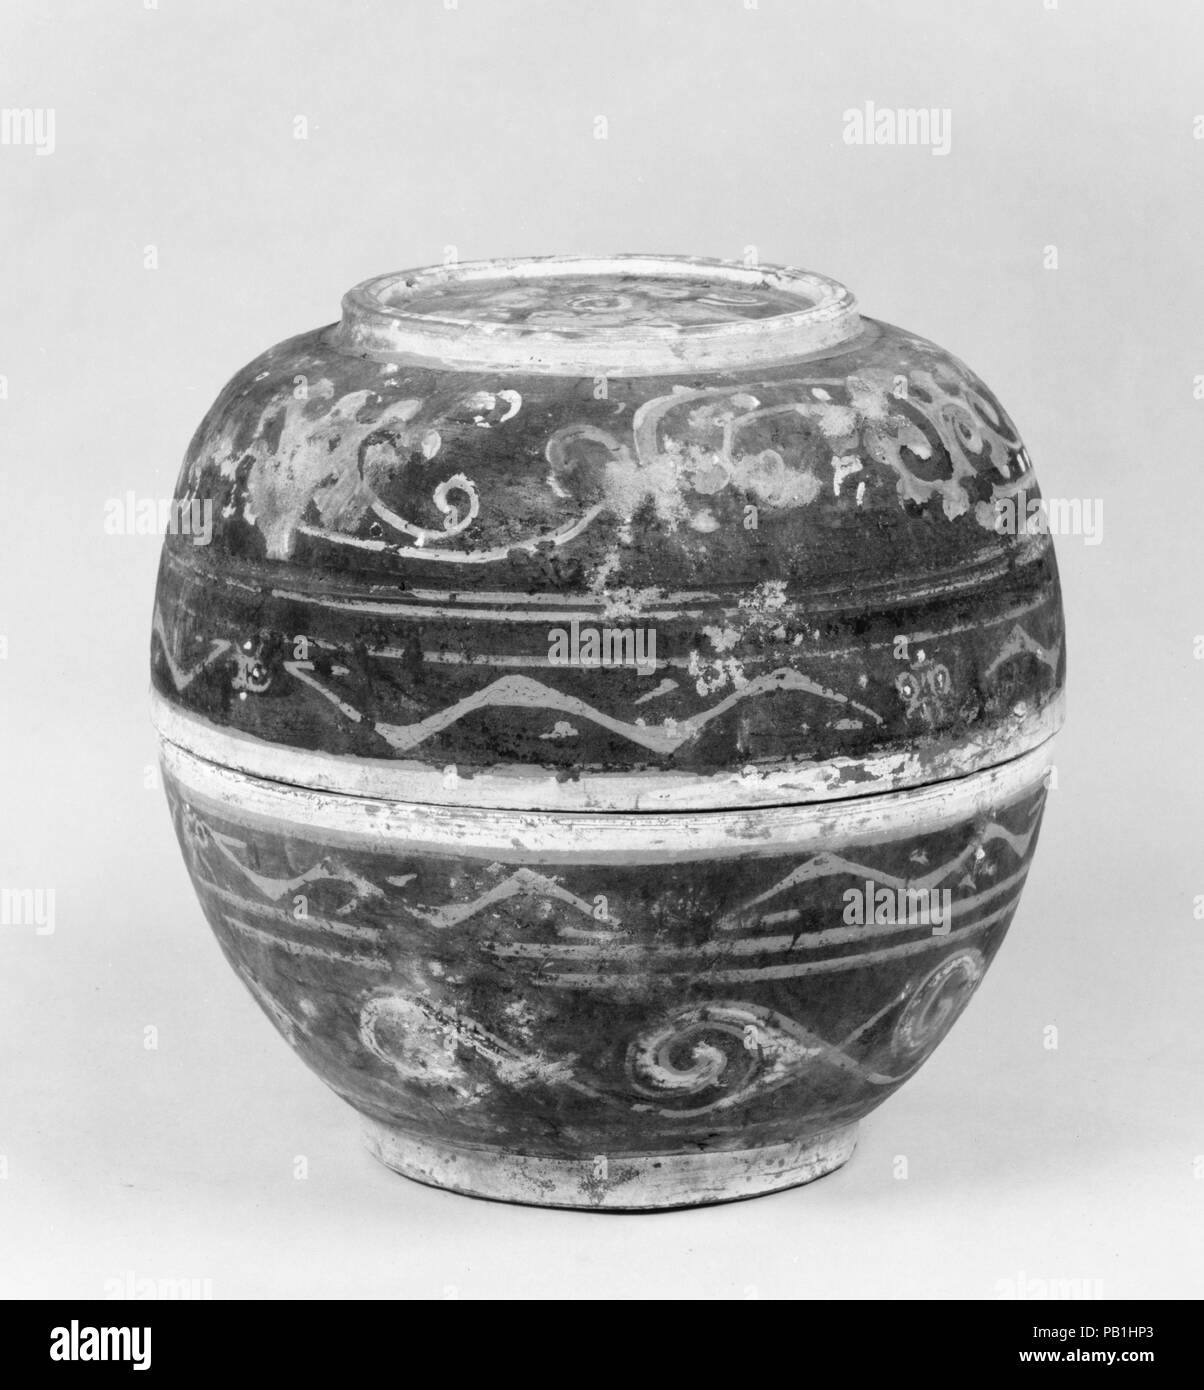 Covered Bowl (He). Culture: China. Dimensions: H. 6 7/8 in. (17.5 cm); Diam. 7 5/16 in. (18.5 cm).  Instead of being glazed, some tomb pottery was decorated with pigments applied after firing to mimic the form and decor of vessels made of more precious materials such as lacquer or bronze. Museum: Metropolitan Museum of Art, New York, USA. Stock Photo